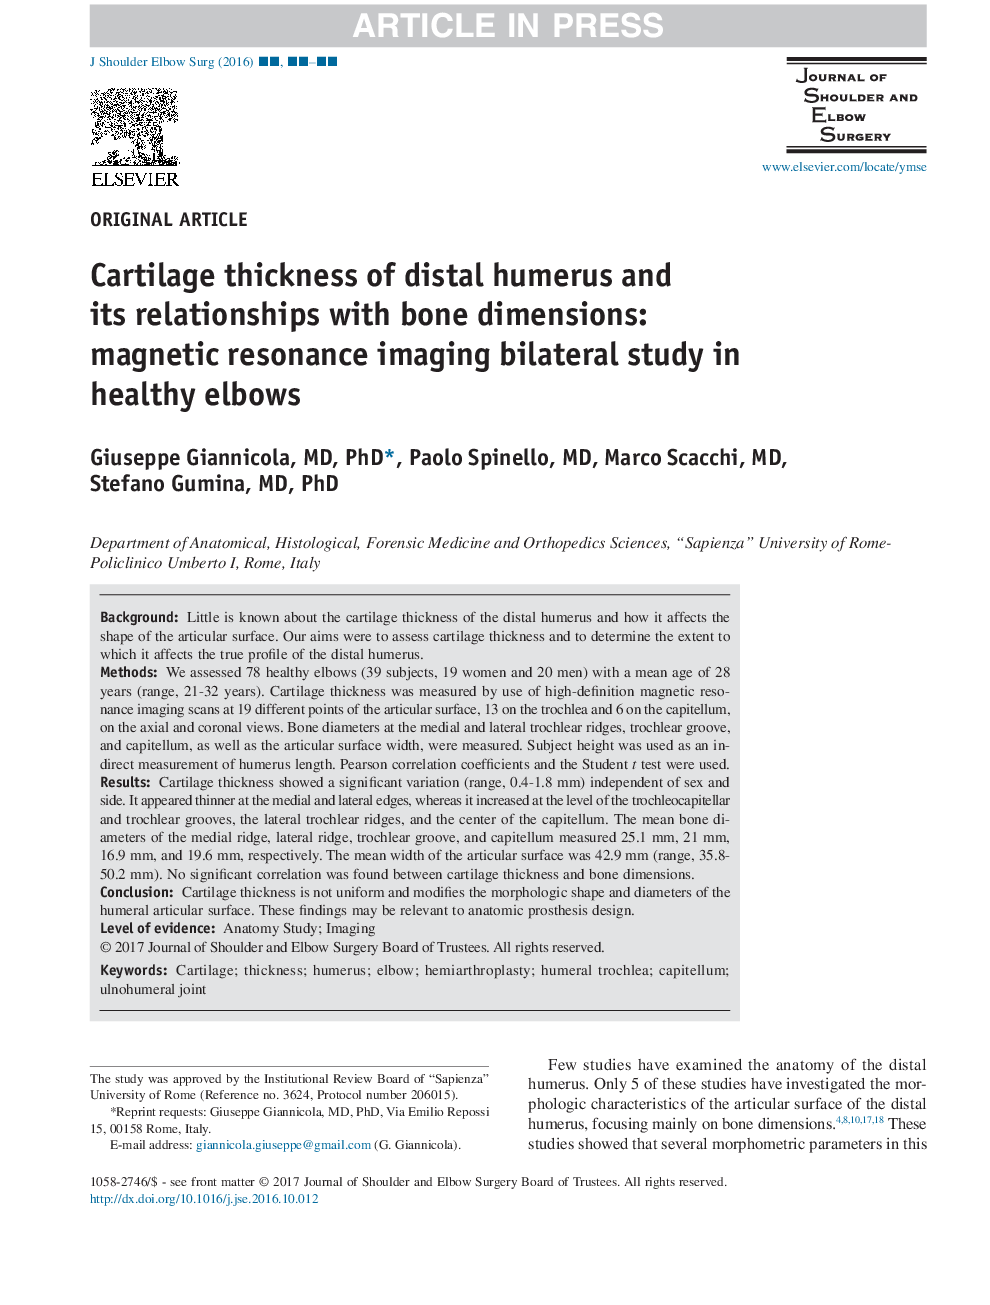 Cartilage thickness of distal humerus and its relationships with bone dimensions: magnetic resonance imaging bilateral study in healthy elbows